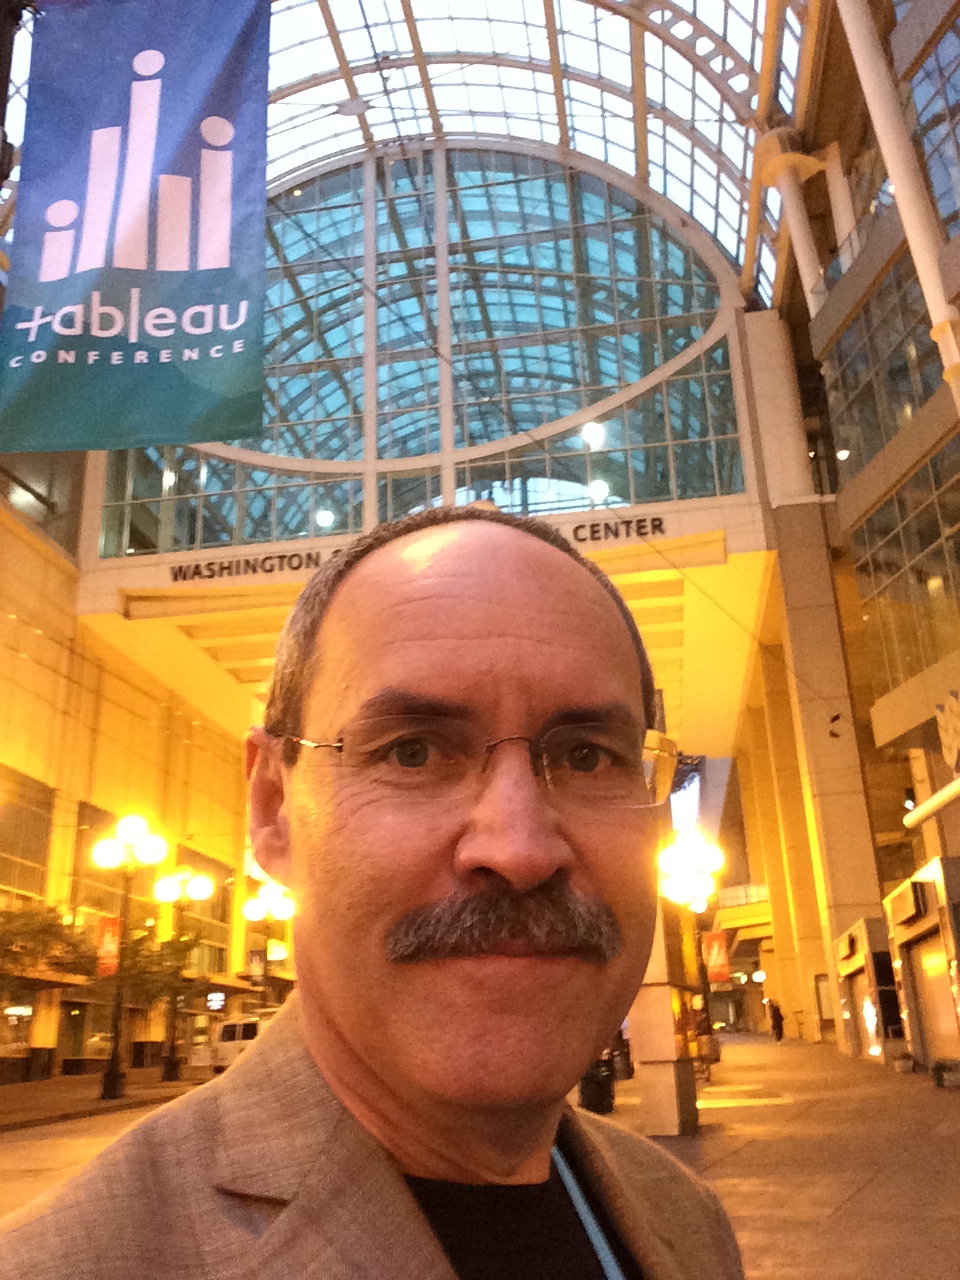 Your author in front of the Washington State Convention Center.